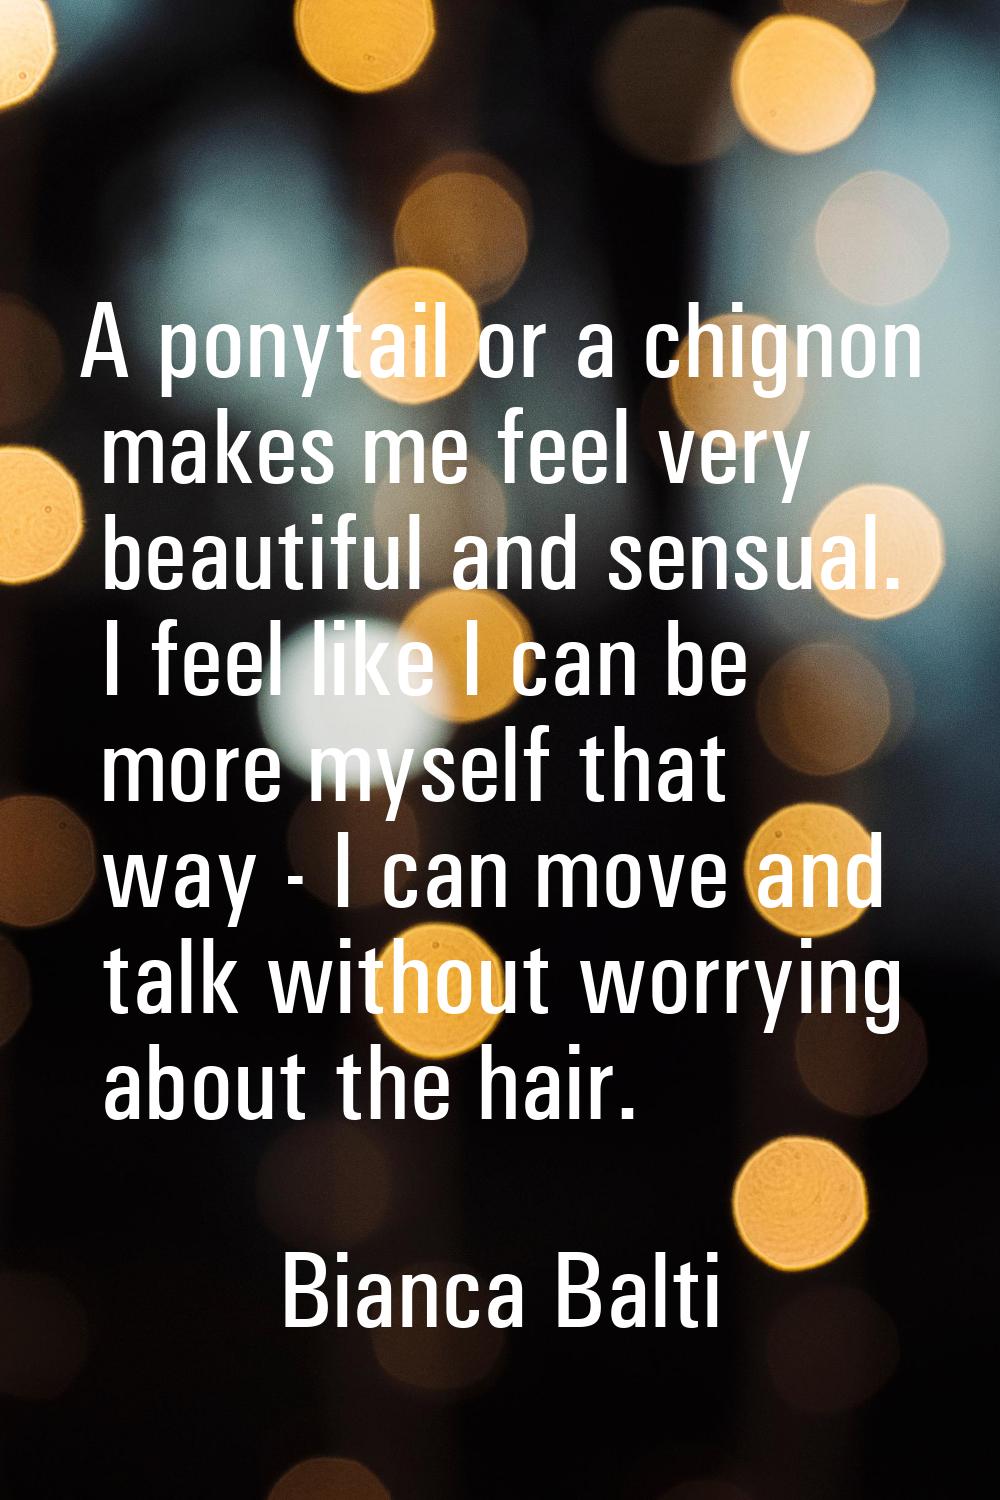 A ponytail or a chignon makes me feel very beautiful and sensual. I feel like I can be more myself 